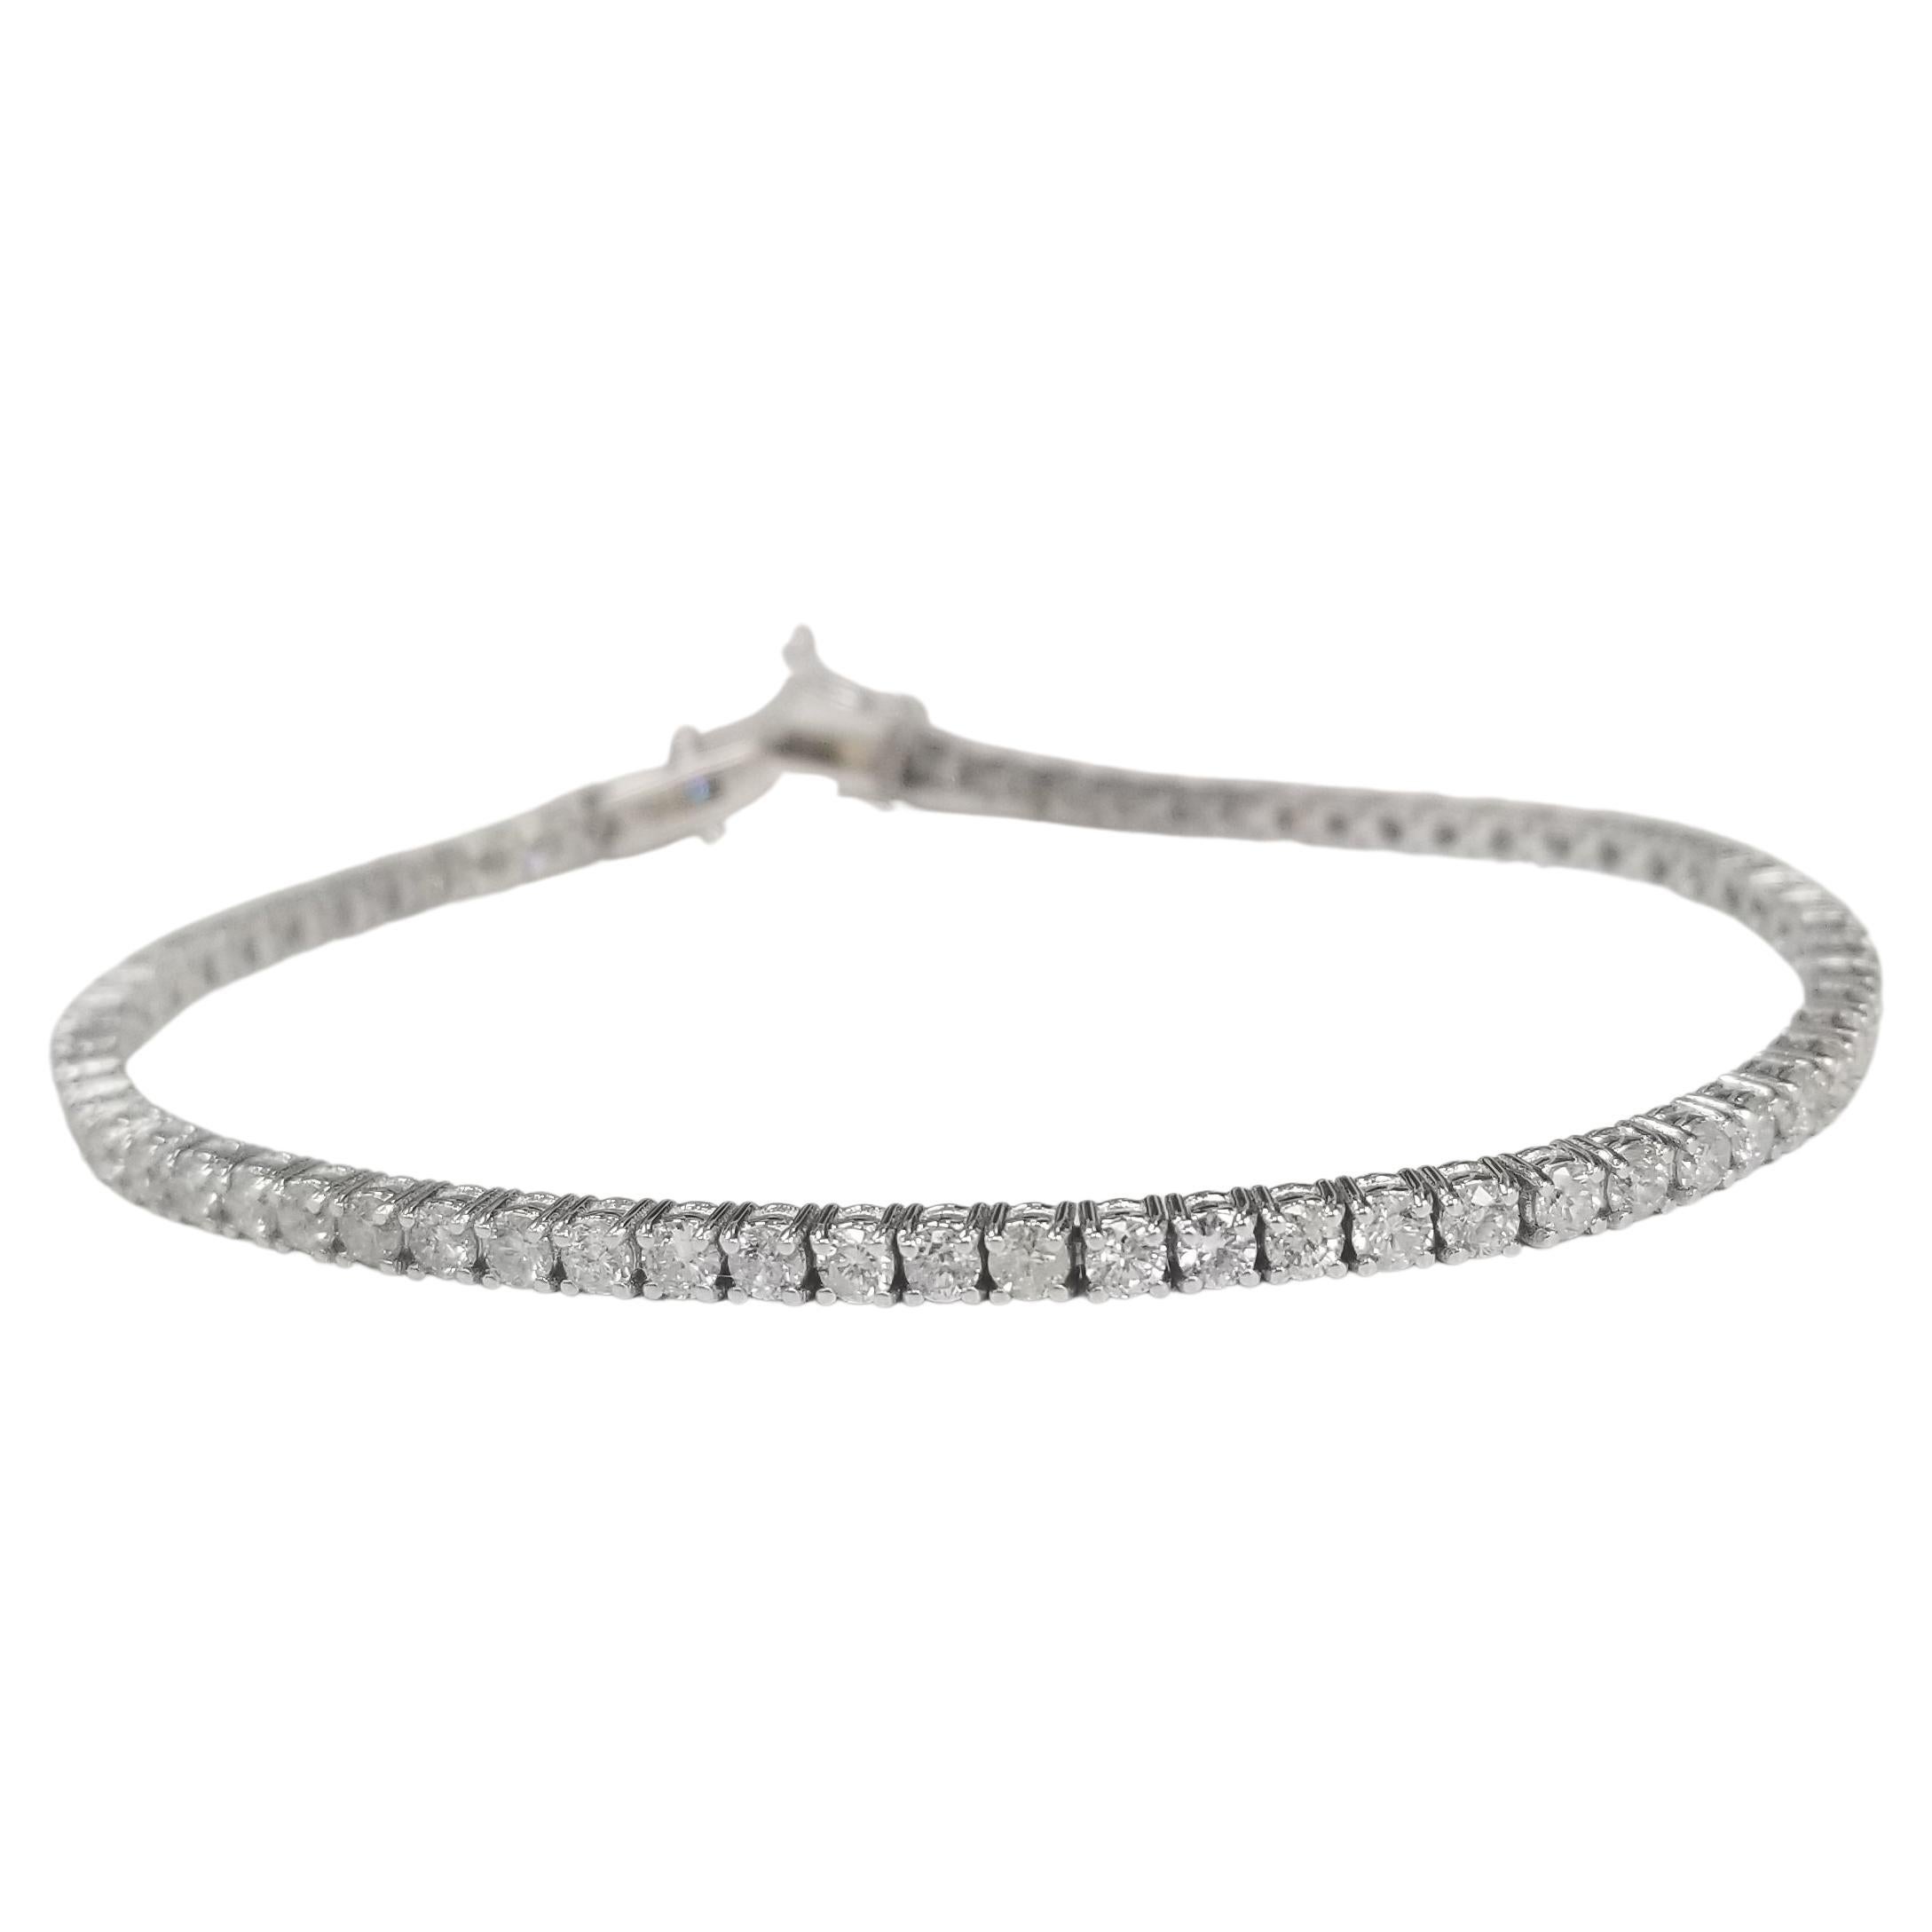 14k White Gold Diamond "Tennis" Bracelet Weighing 3.75 Carats For Sale